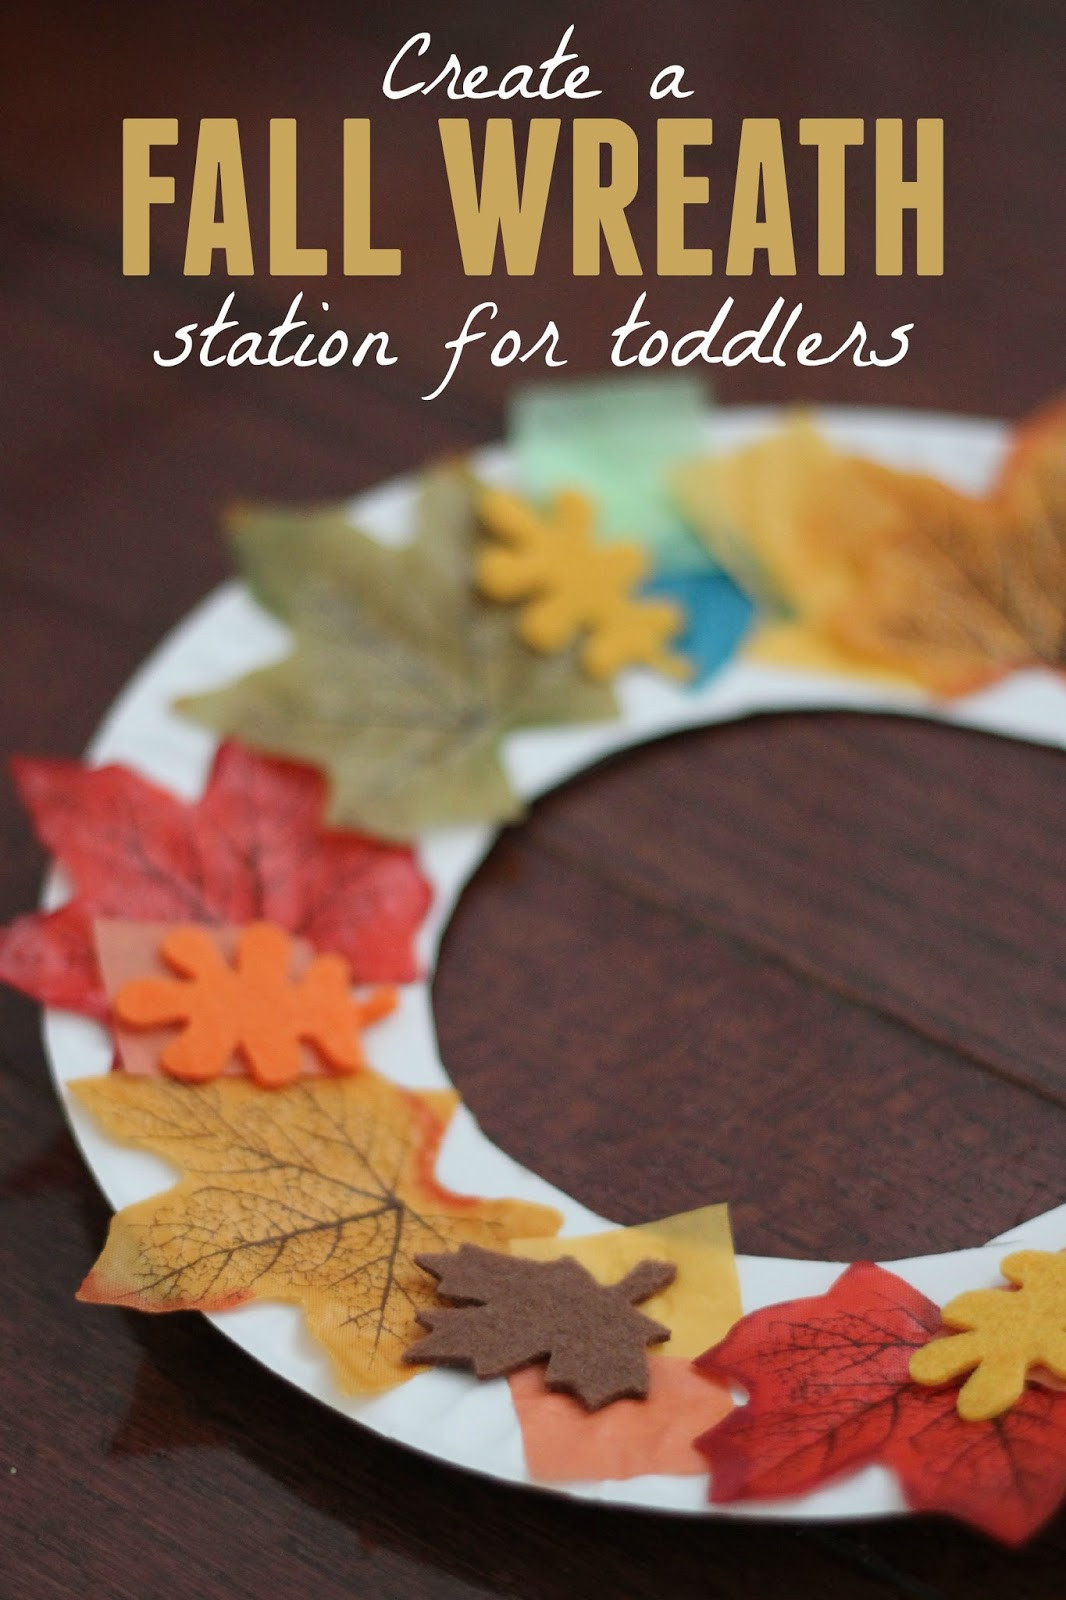 Fall Toddler Craft Ideas
 Toddler Approved Fall Wreath Making Station for Toddlers